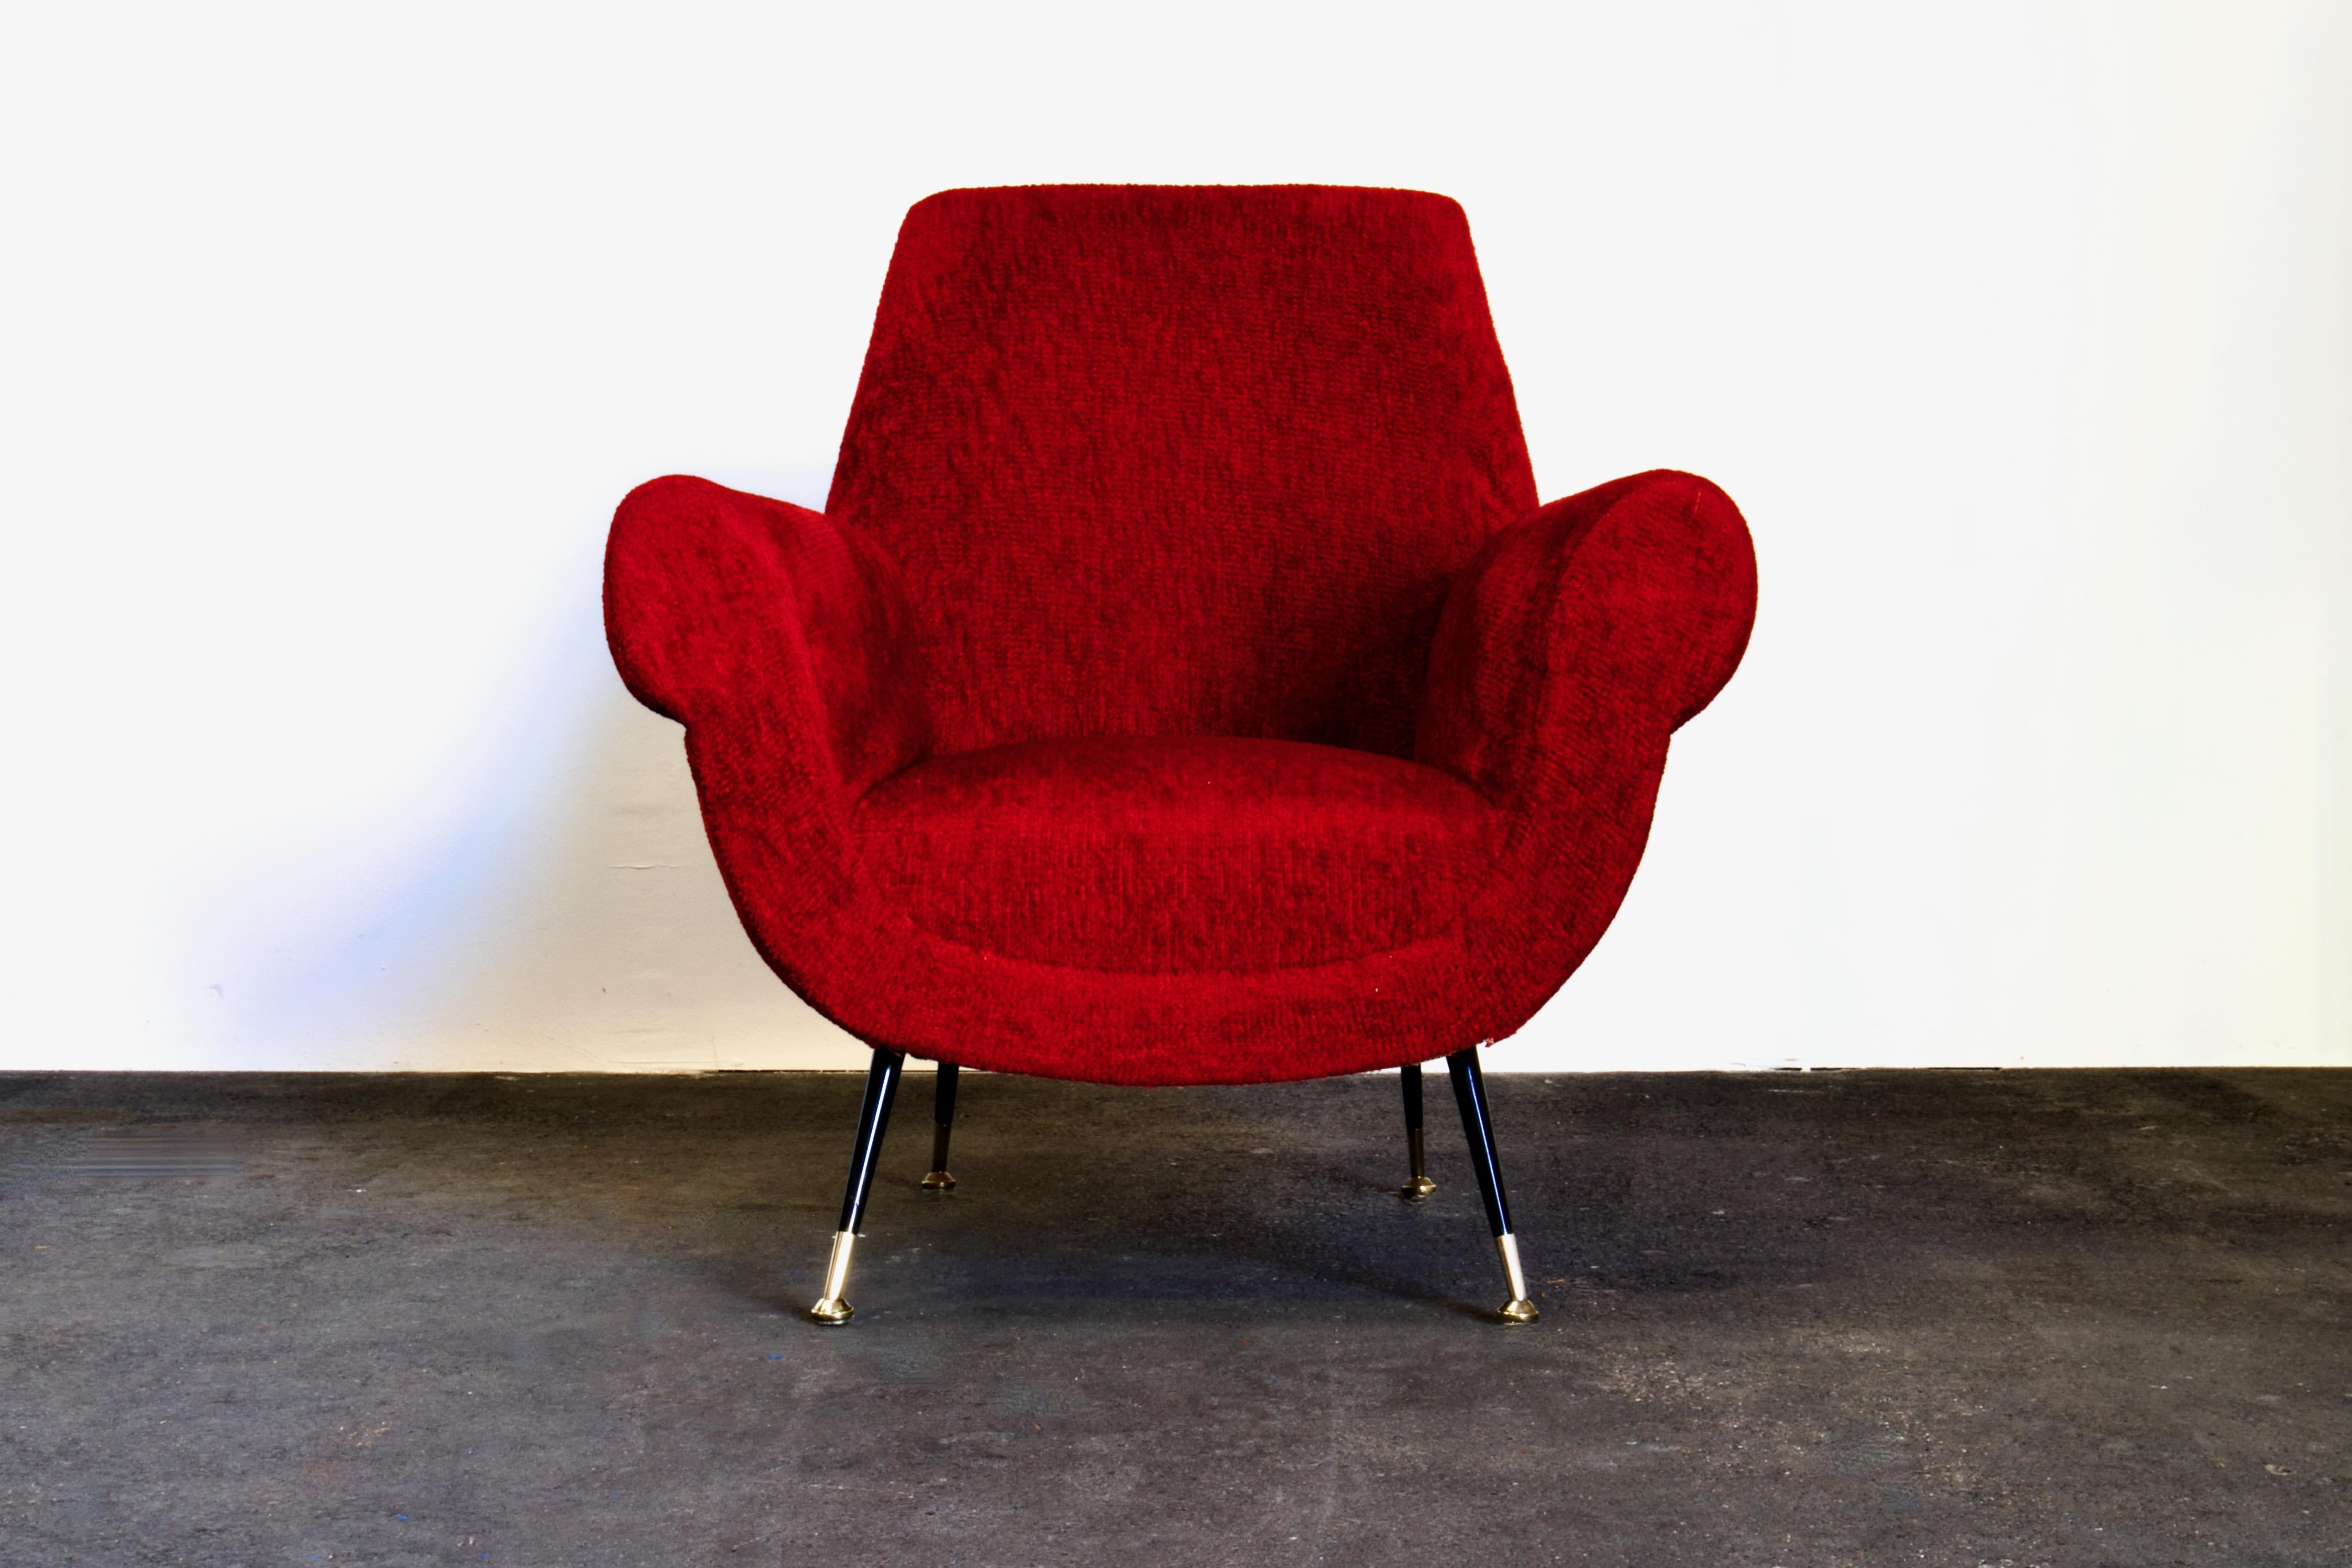 Mid-Century Modern Pair of Gigi Radice Club / Lounge Armchairs for Minotti, 1950s Italy, Red Fabric For Sale